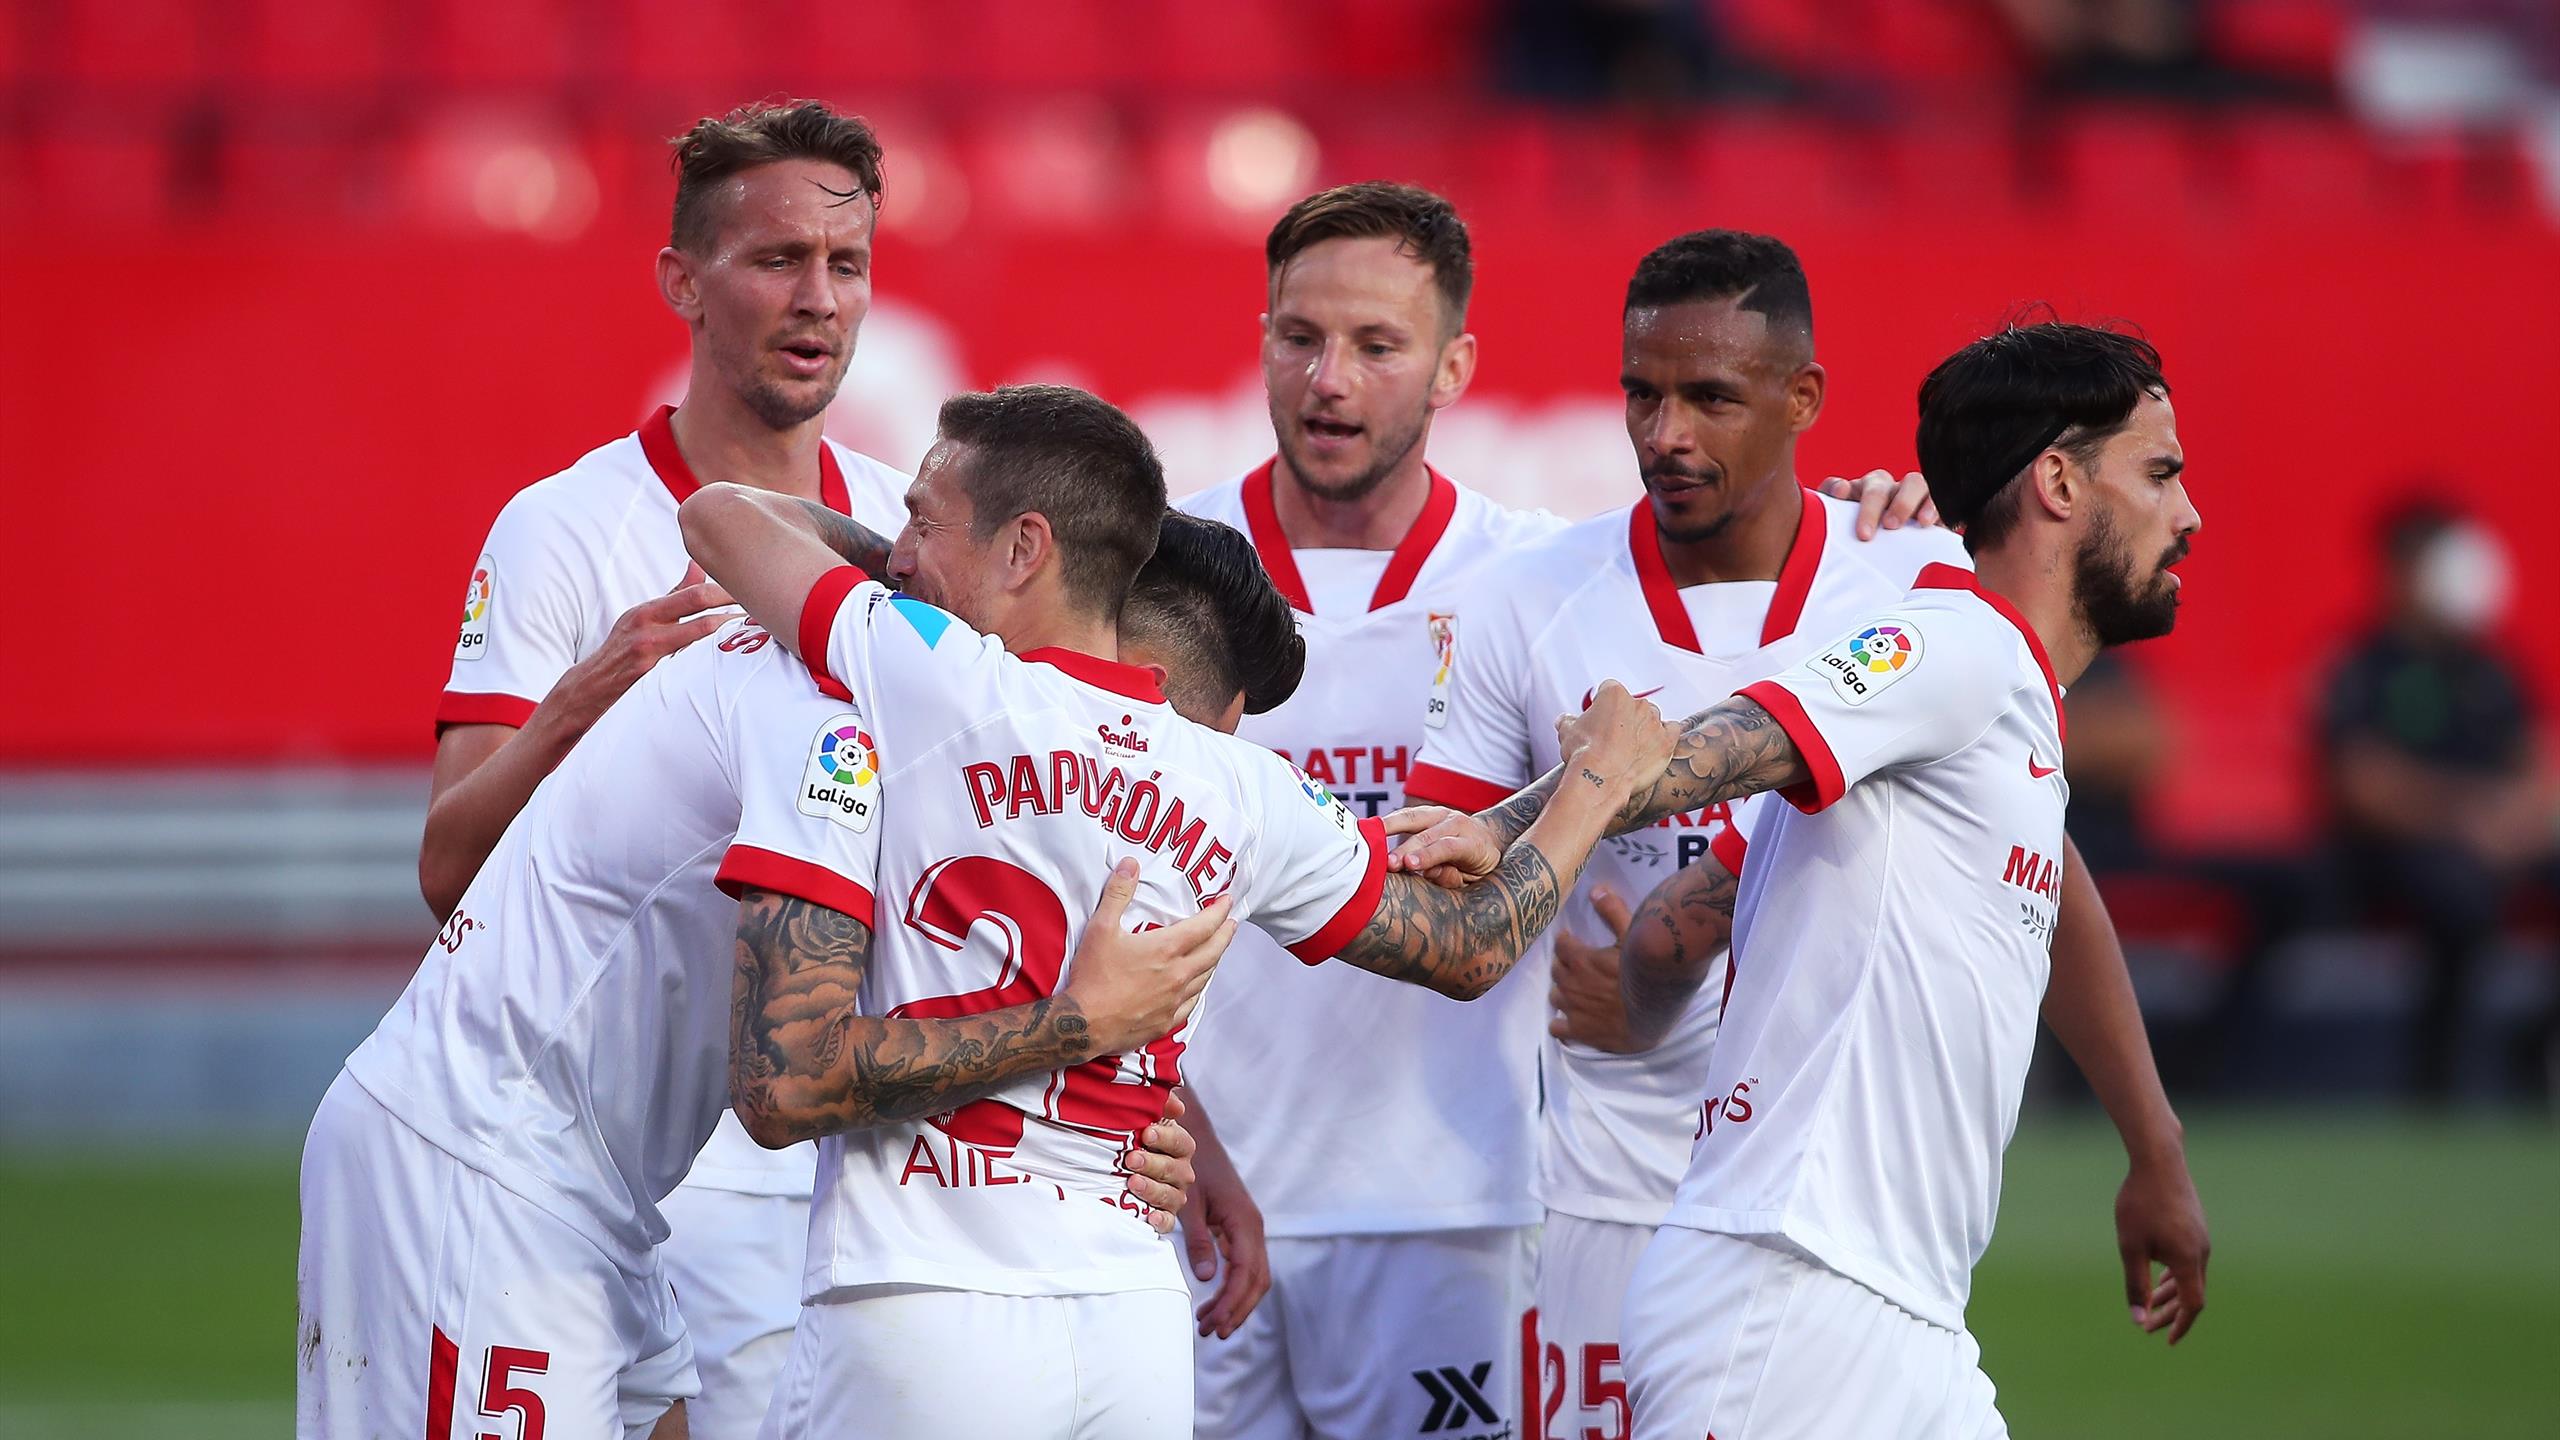 BBC Report: Sevilla look likely to court sales again this summer, according to the latest coming out of the Andalusian capital…